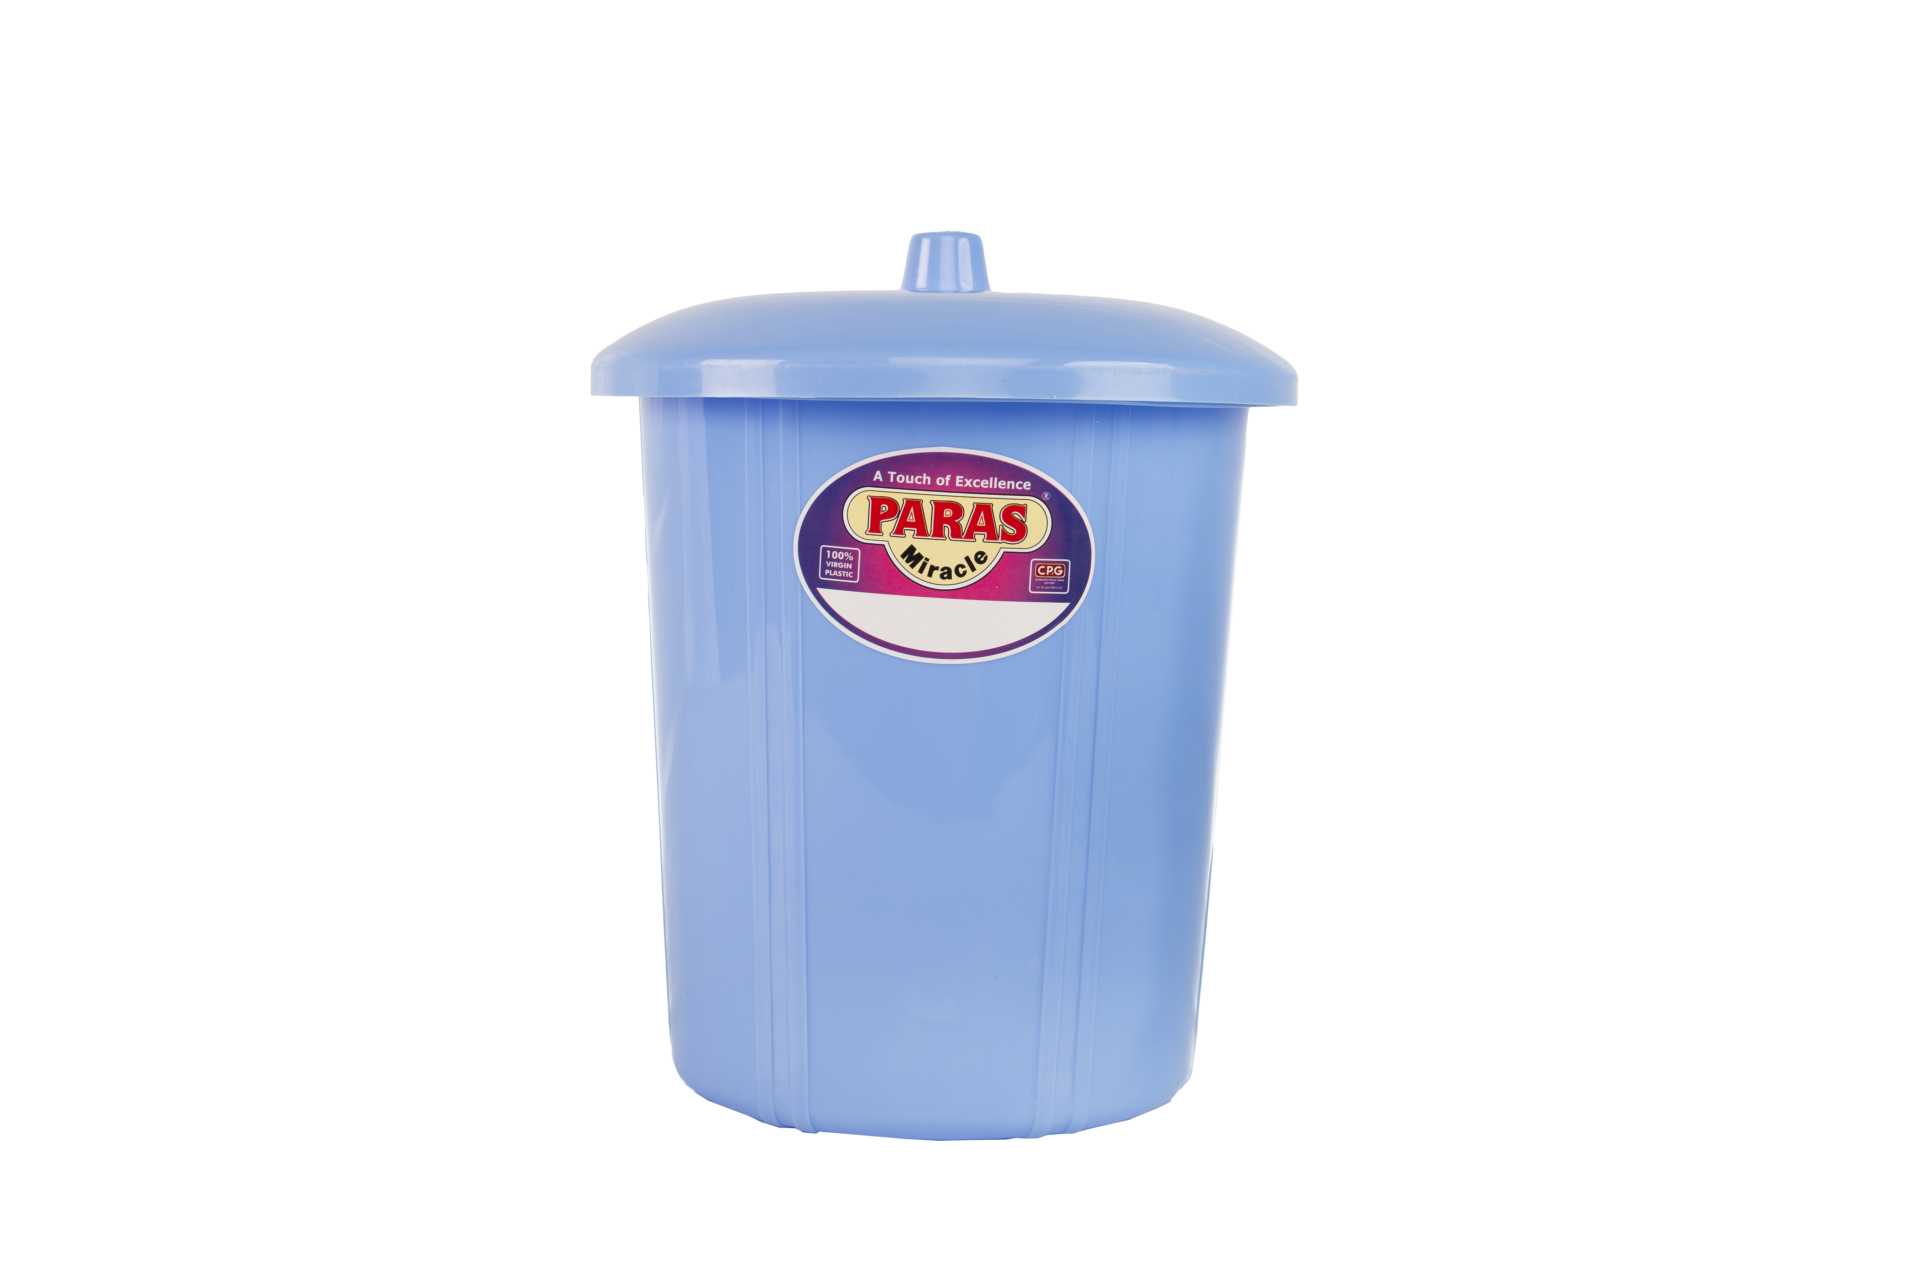 Paras dustbinfly (7ltr) with lid